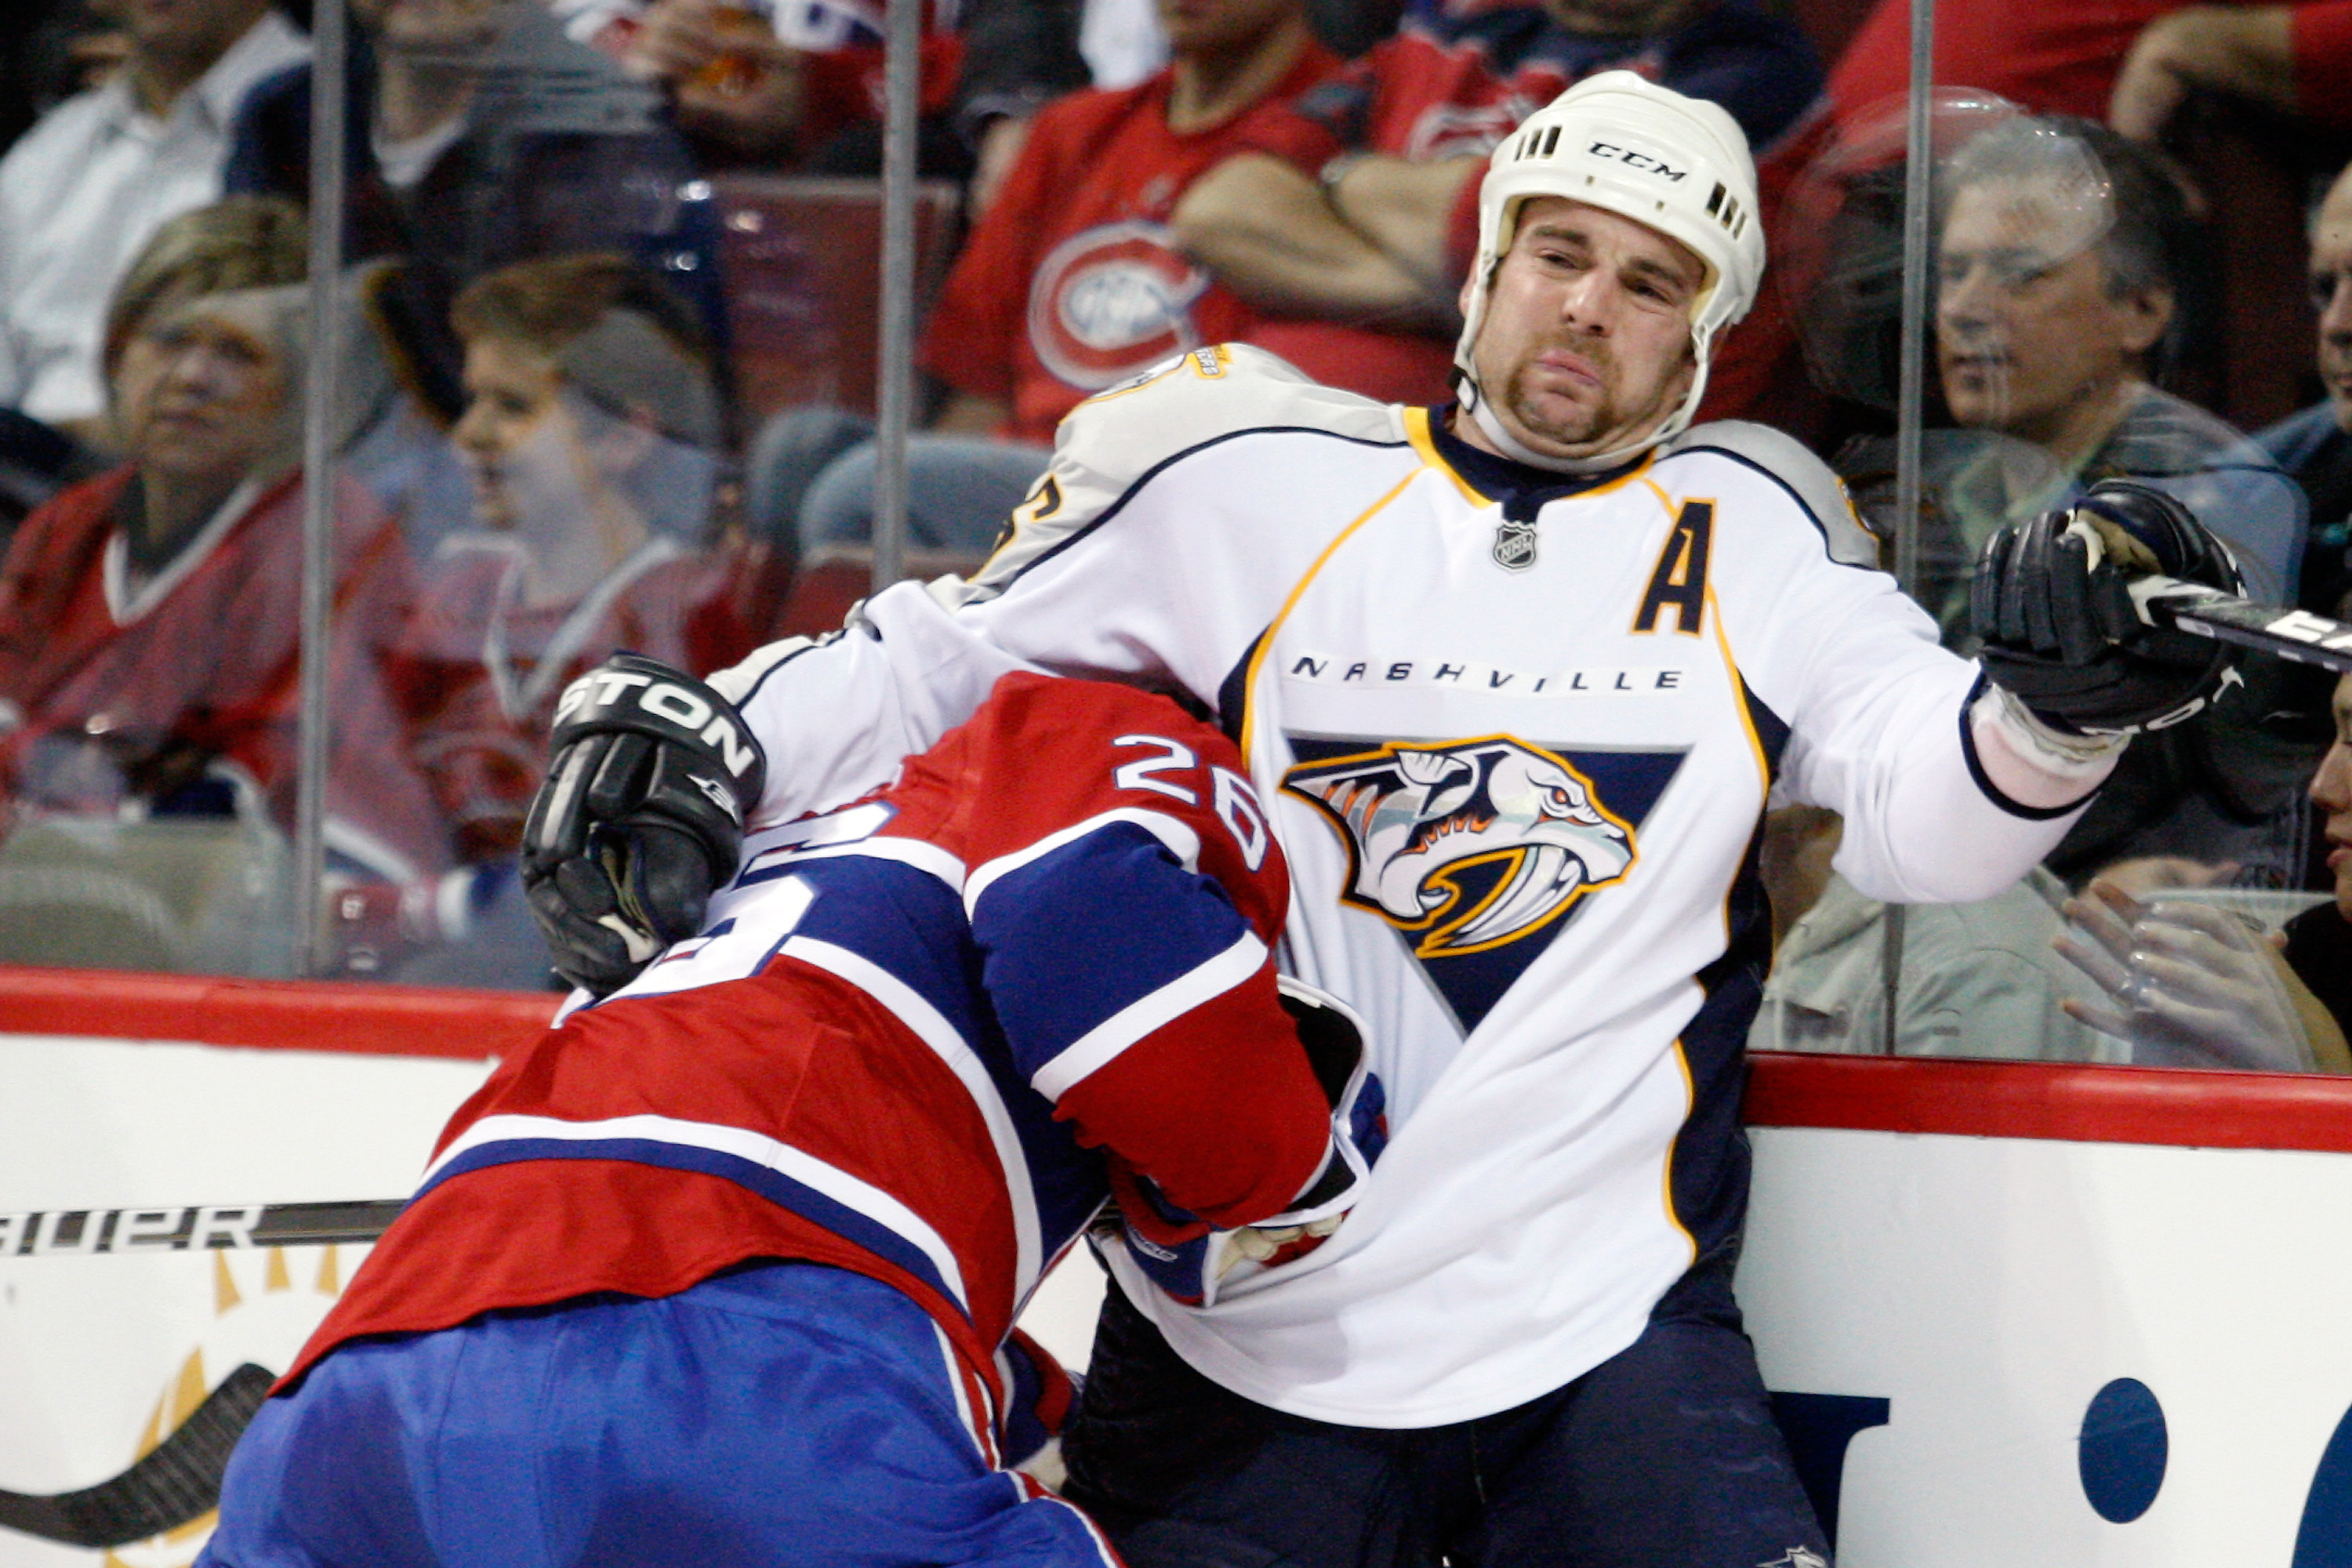 MONTREAL- NOVEMBER 18:  Josh Gorges #26 of the Montreal Canadiens body checks Steve Sullivan #26 of the Nashville Predators during the NHL game at the Bell Centre on November 18, 2010 in Montreal, Quebec, Canada.  (Photo by Richard Wolowicz/Getty Images)